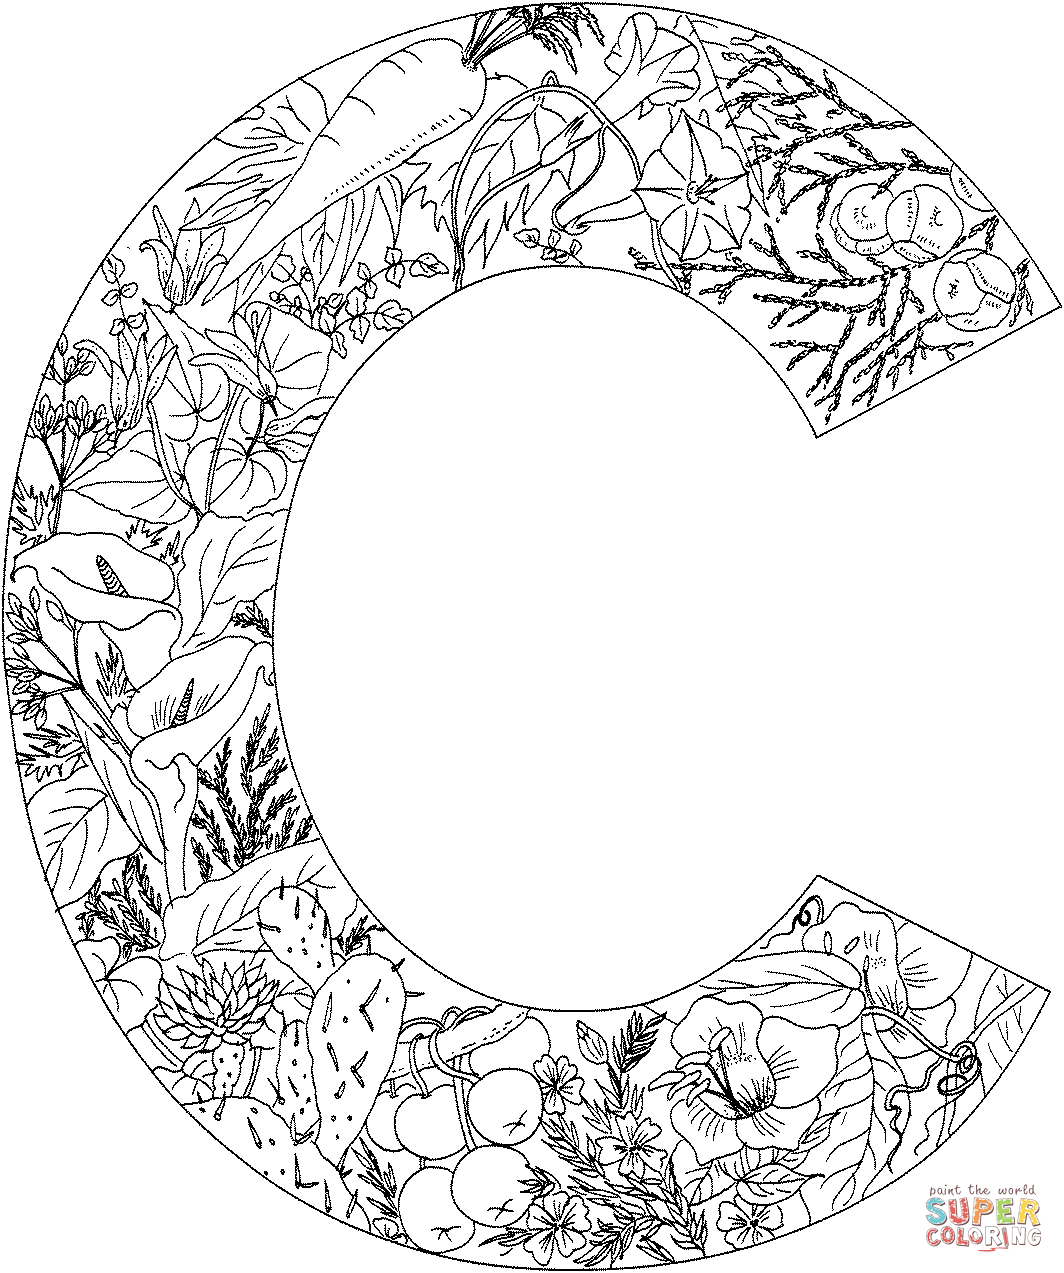 Coloring Sheet Letter C : Letter c coloring pages to download and print